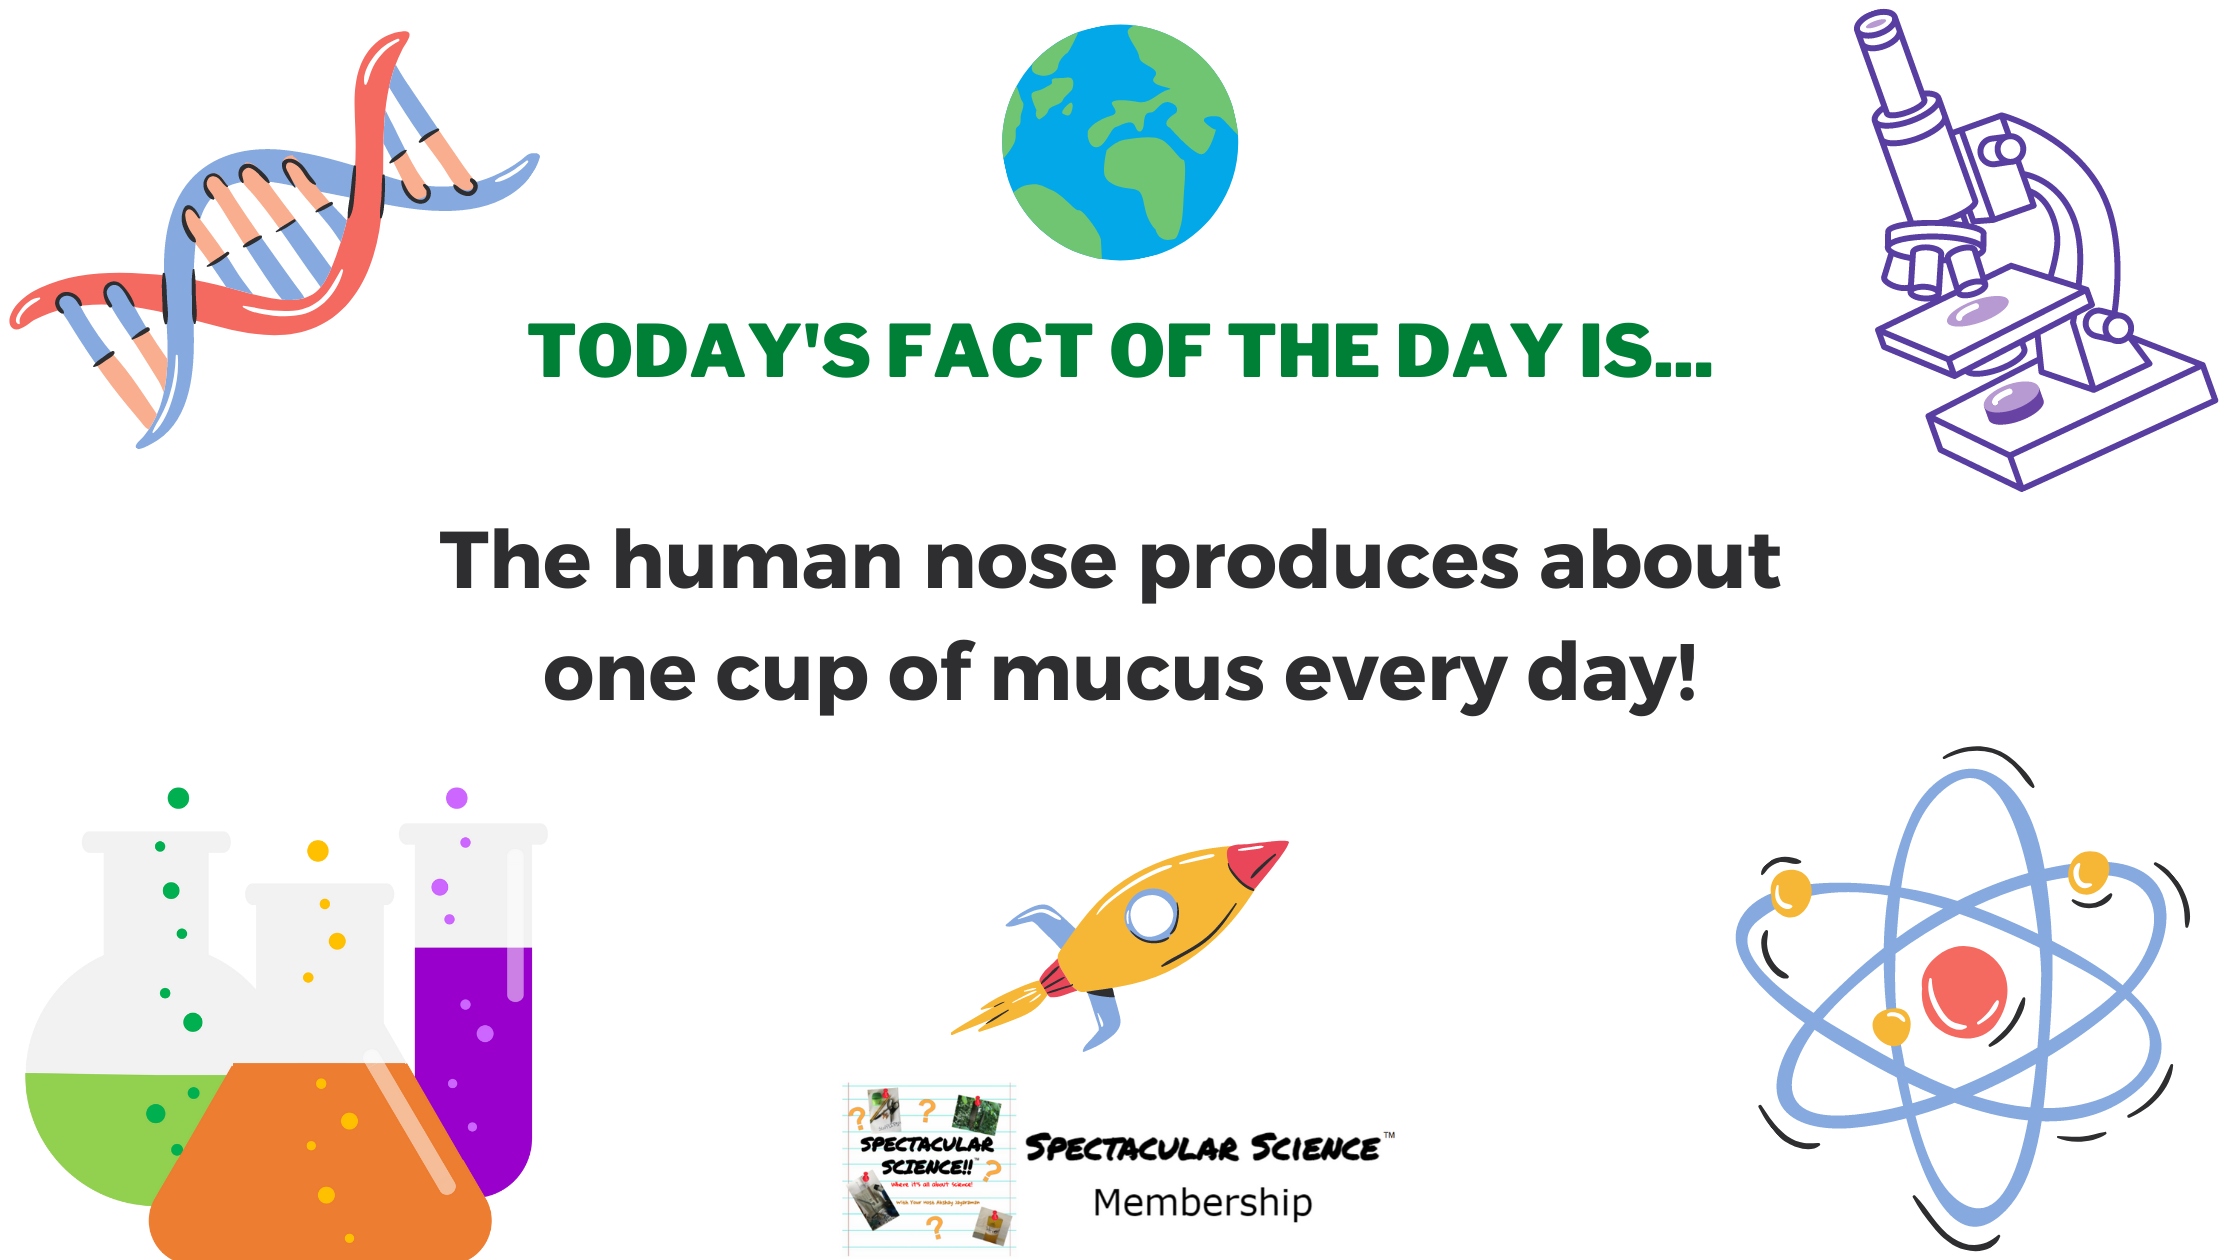 Fact of the Day Image May 18th